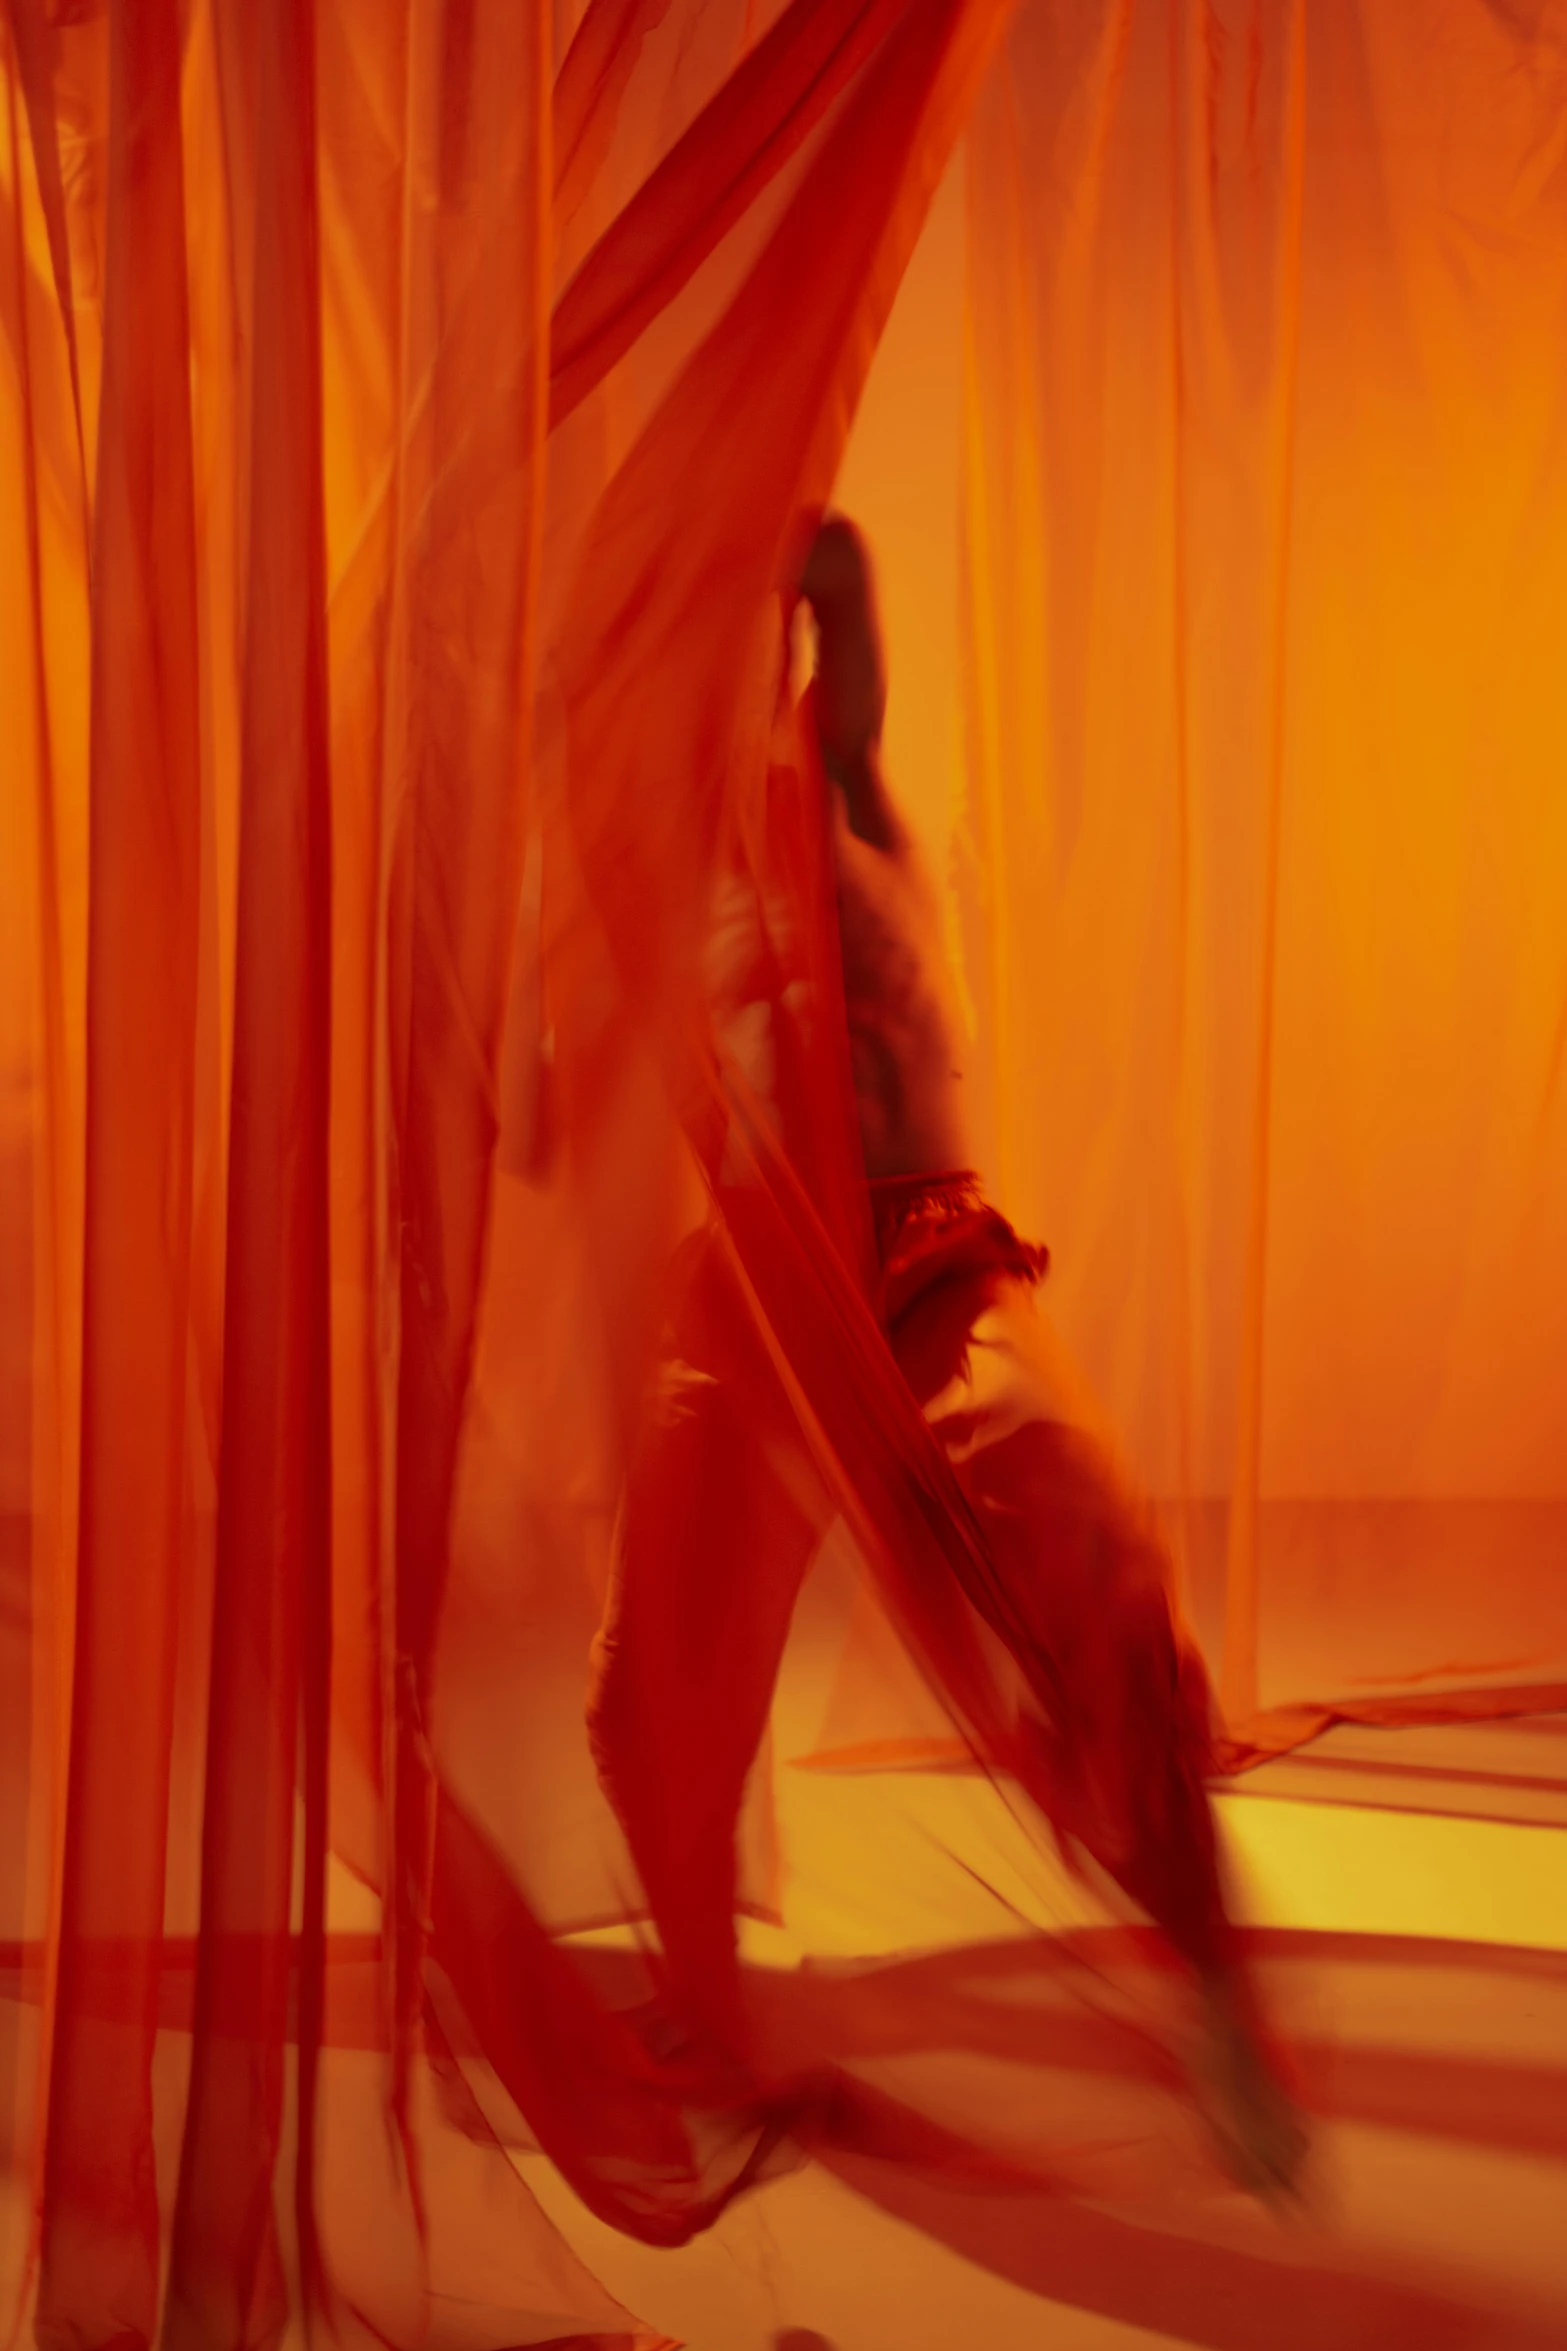 a person walking behind a red curtain with long orange material